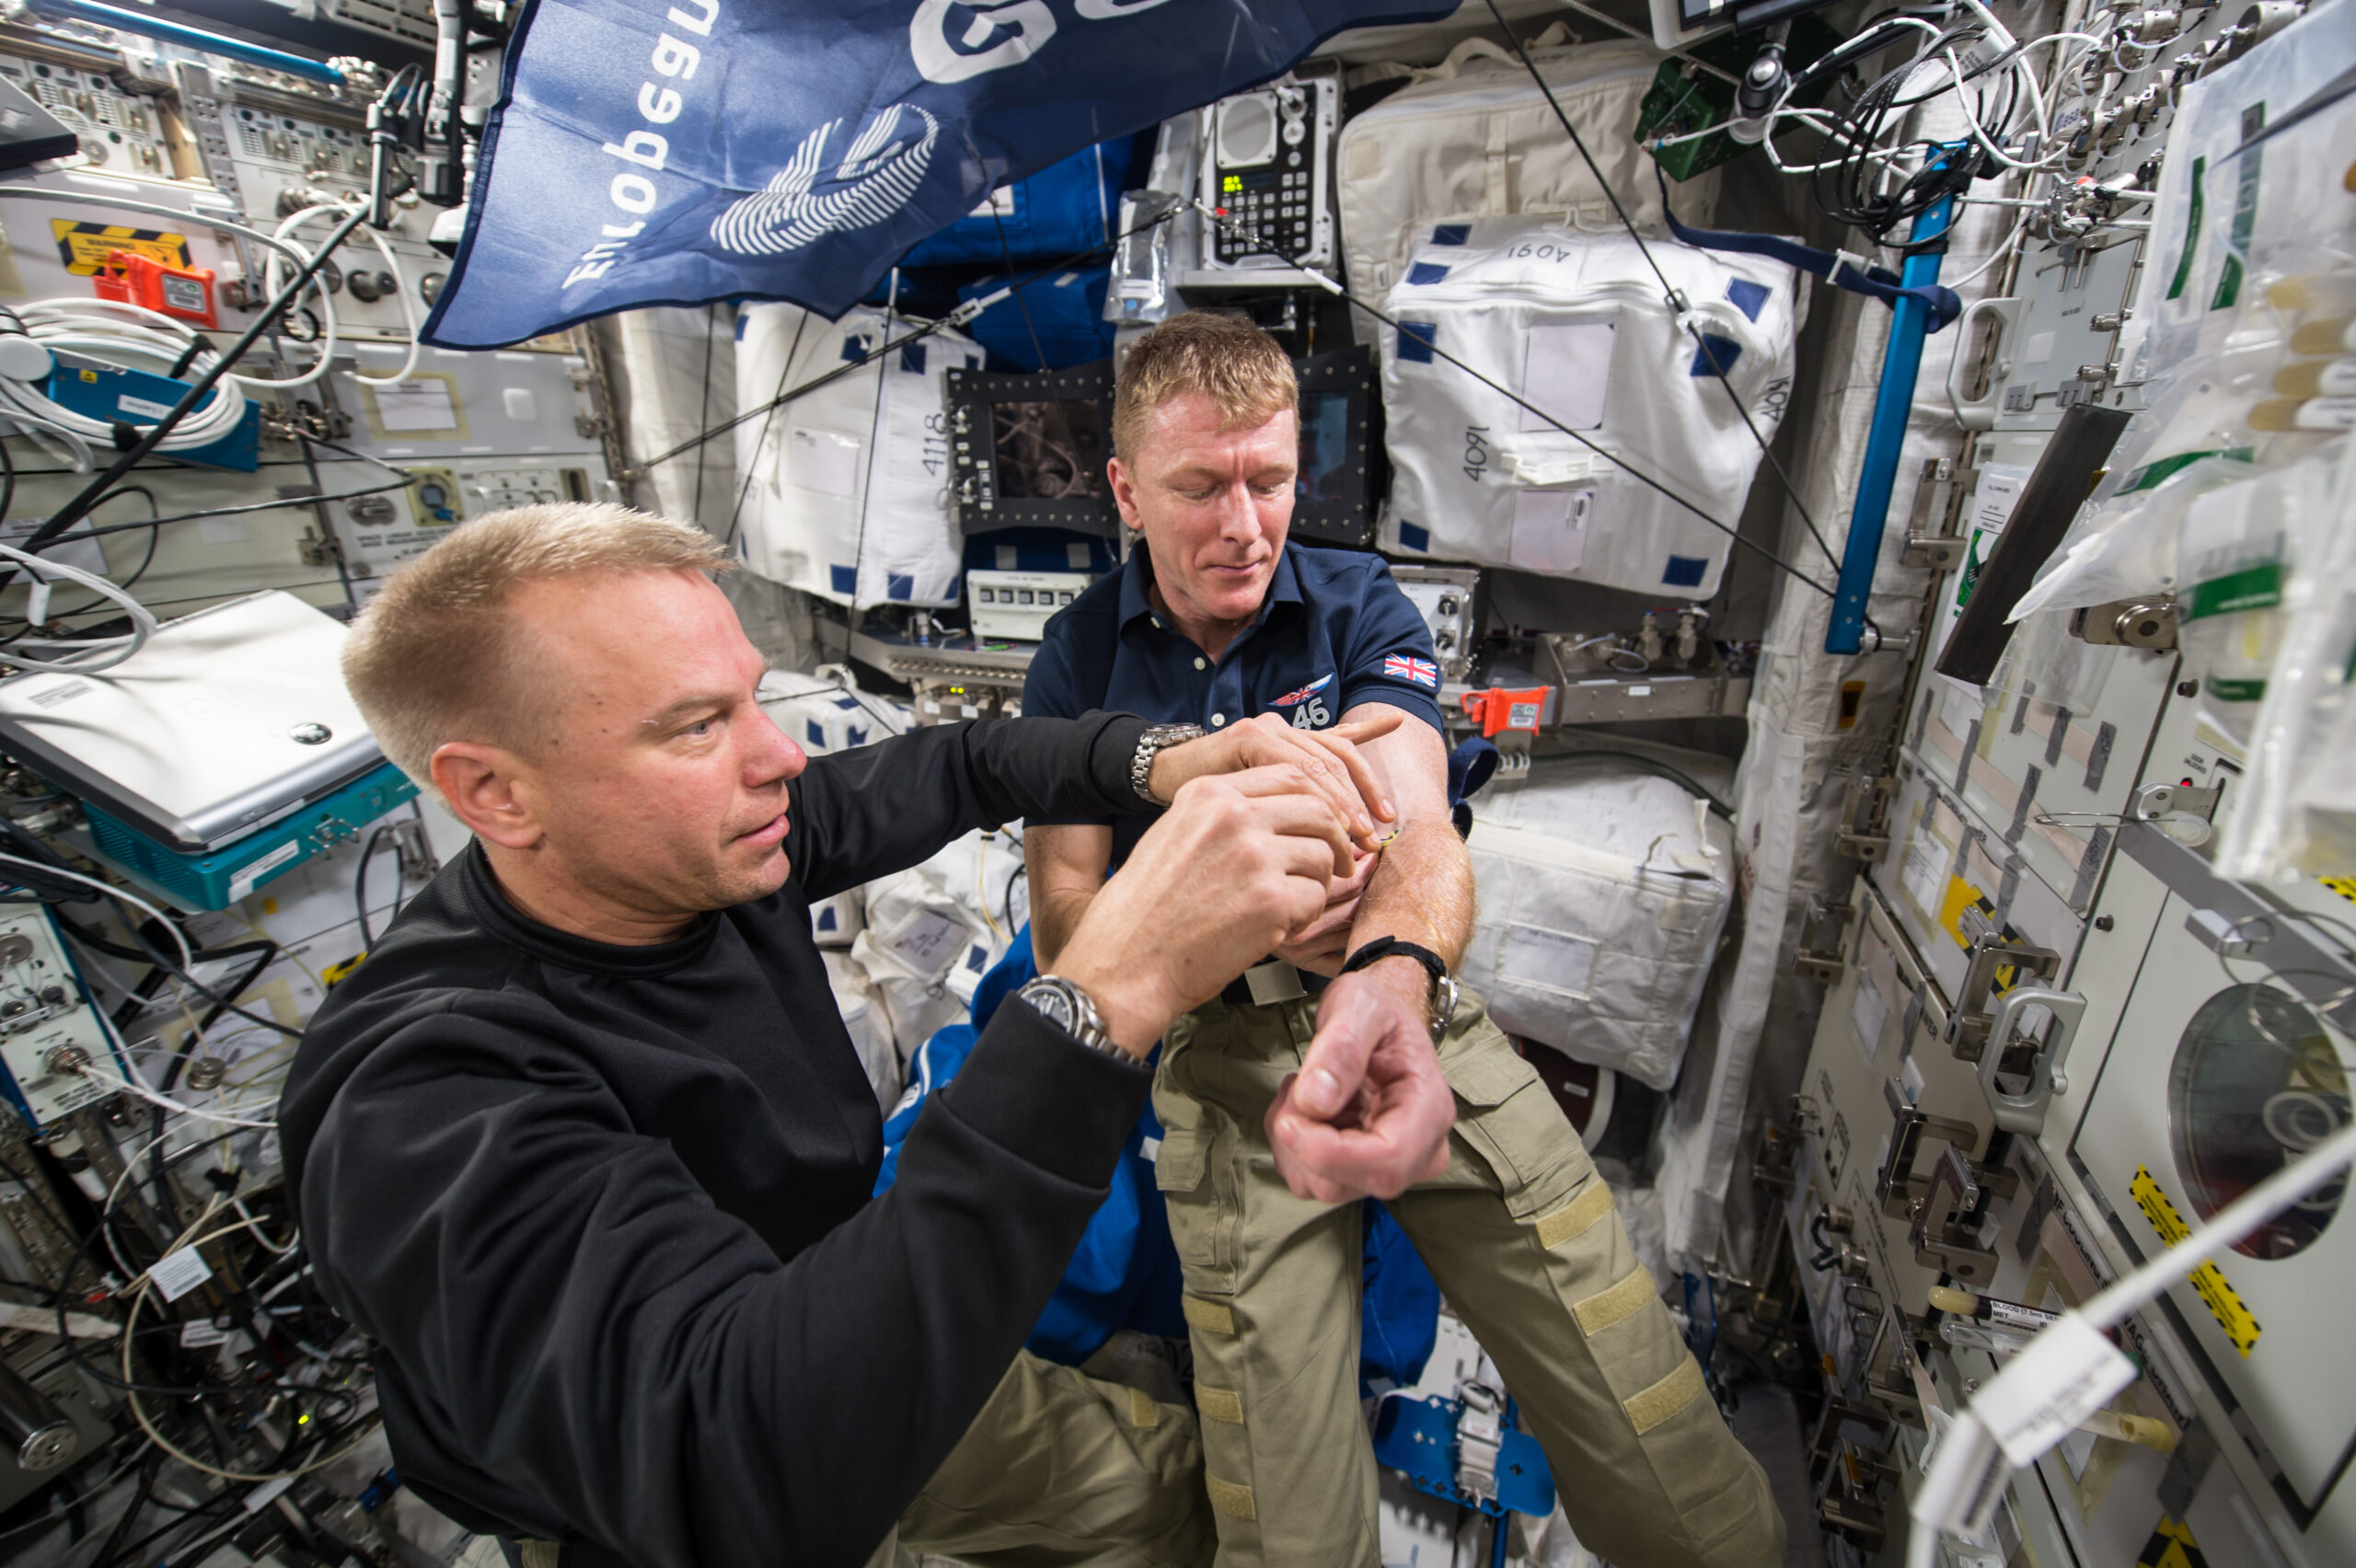 two male astronauts in a space station. one helps the other draw a blood sample from his arm